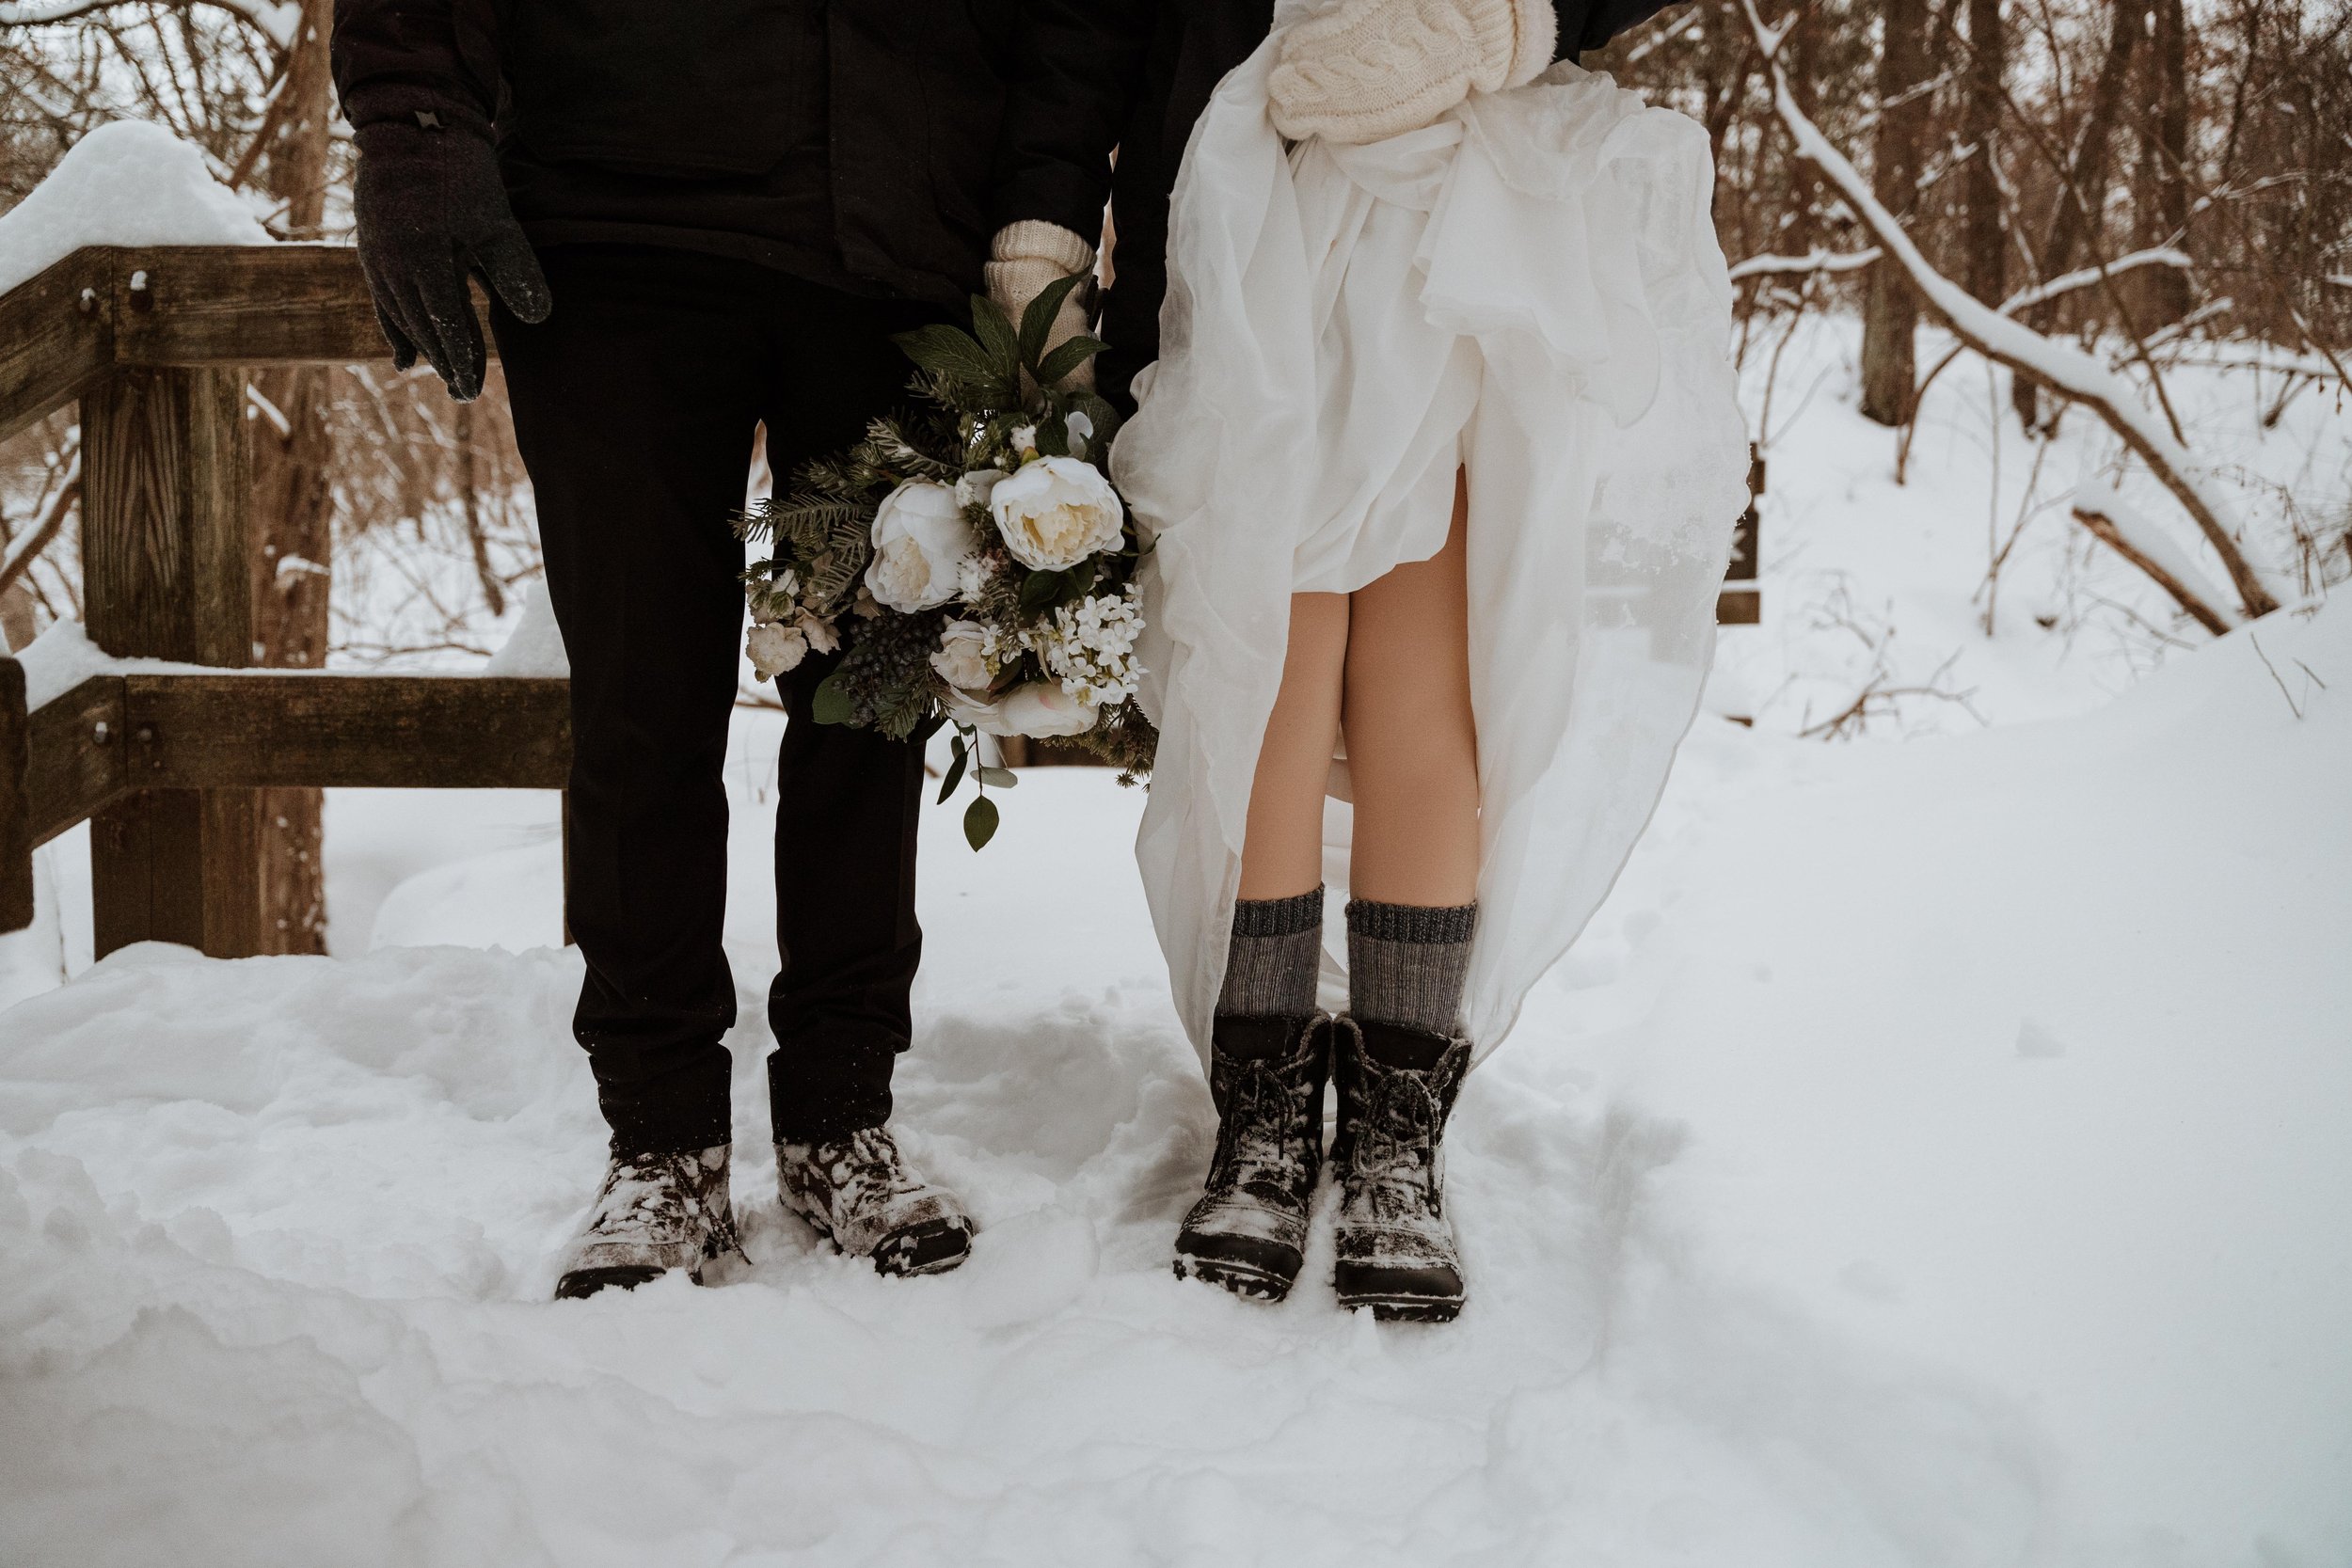 Bride and groom show off their winter boots after their wedding